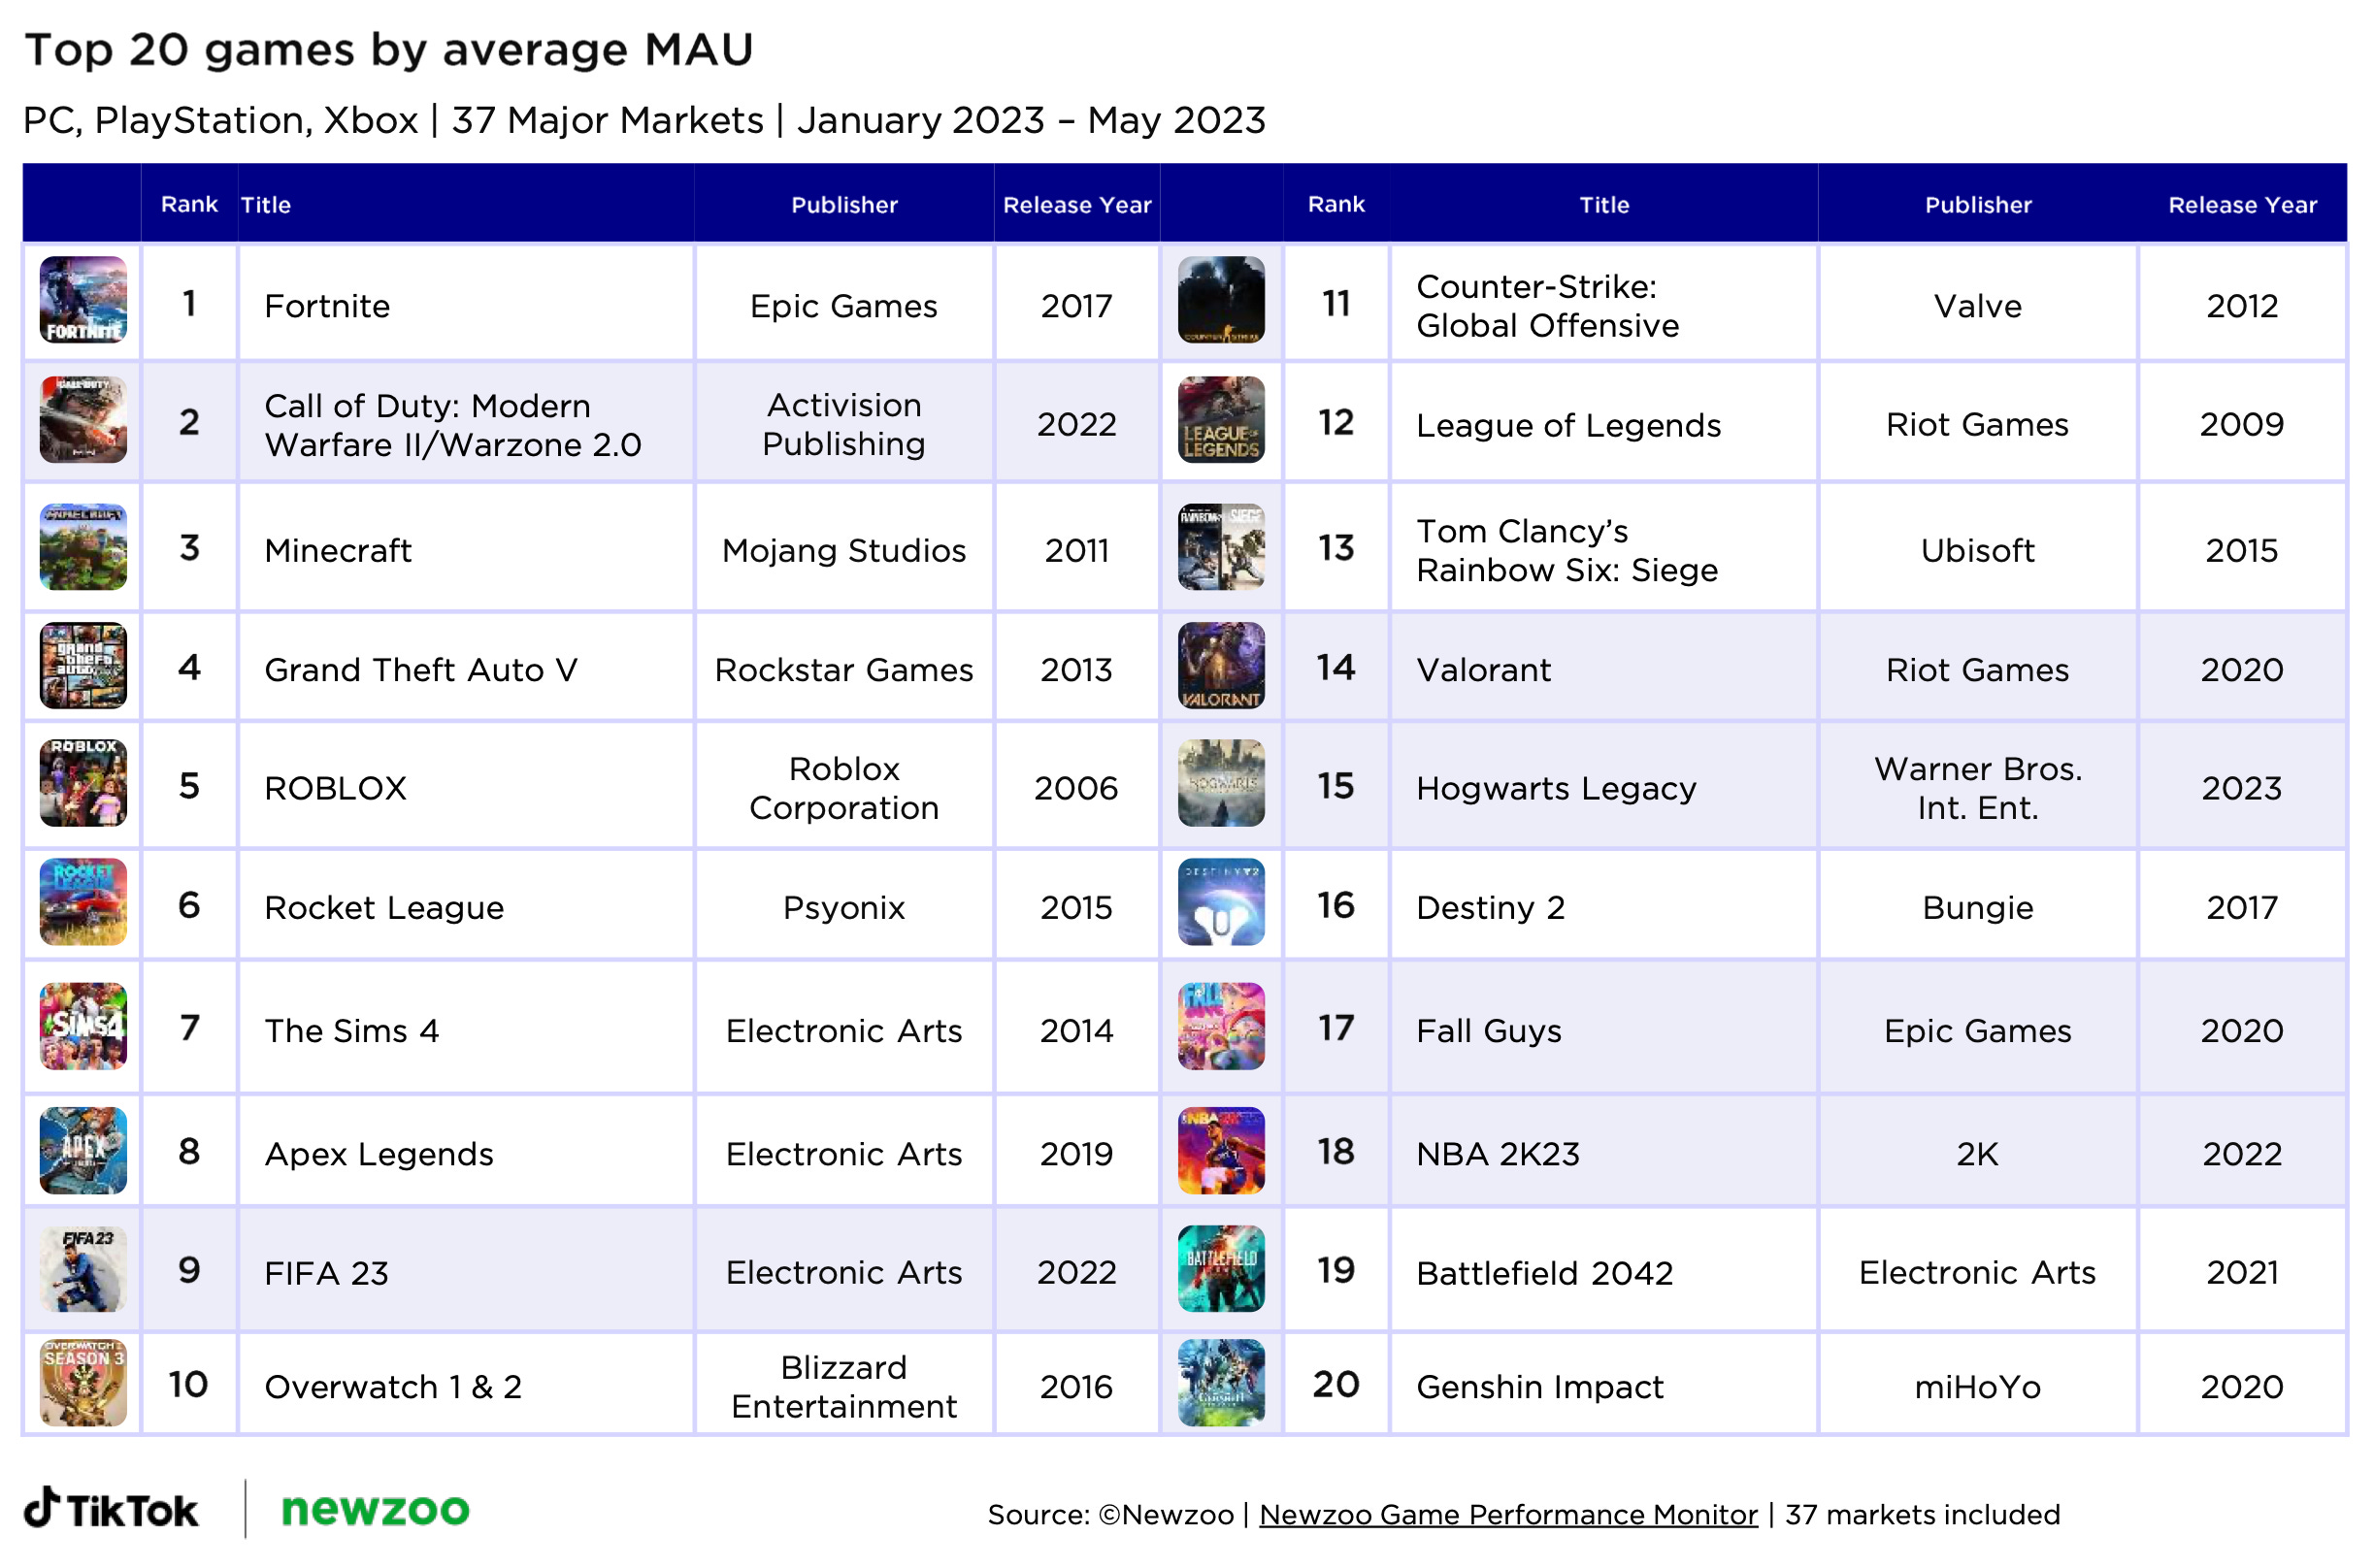 Top Xbox games by monthly active users (MAU) - 37 markets